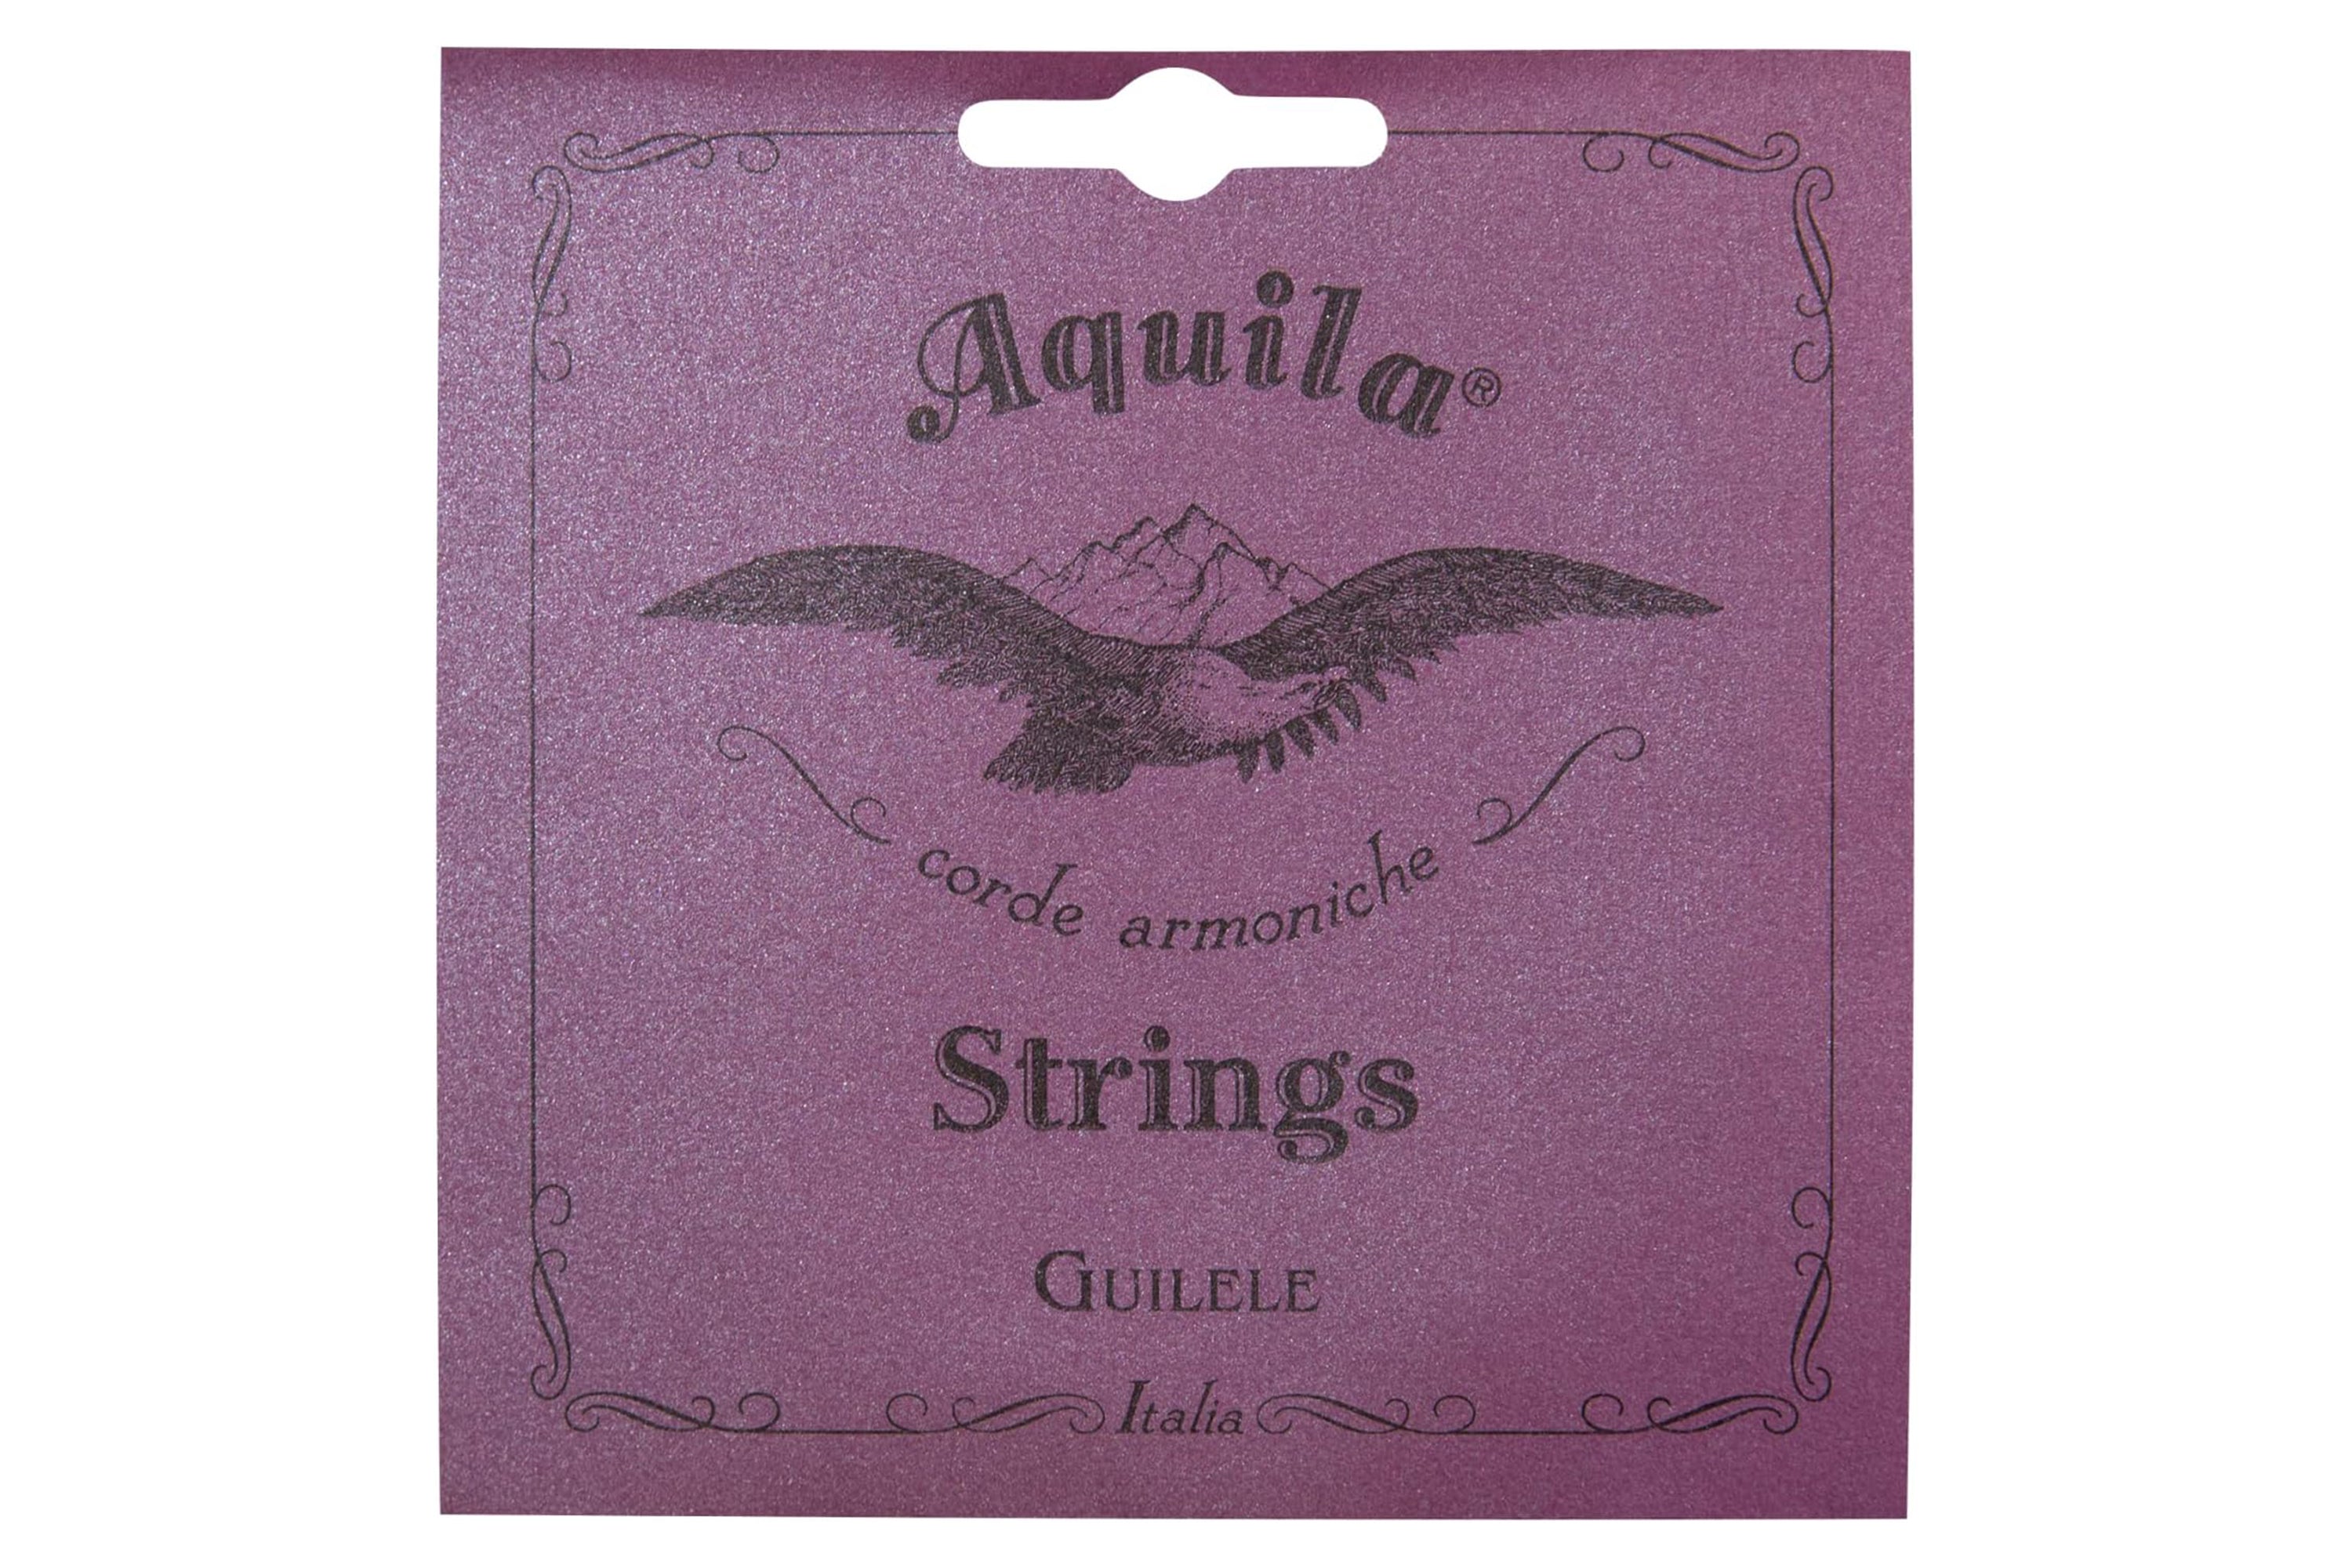 Aquila Nylgut Guilele Strings 96C Full Set of 6 Strings (A to A Tuning)